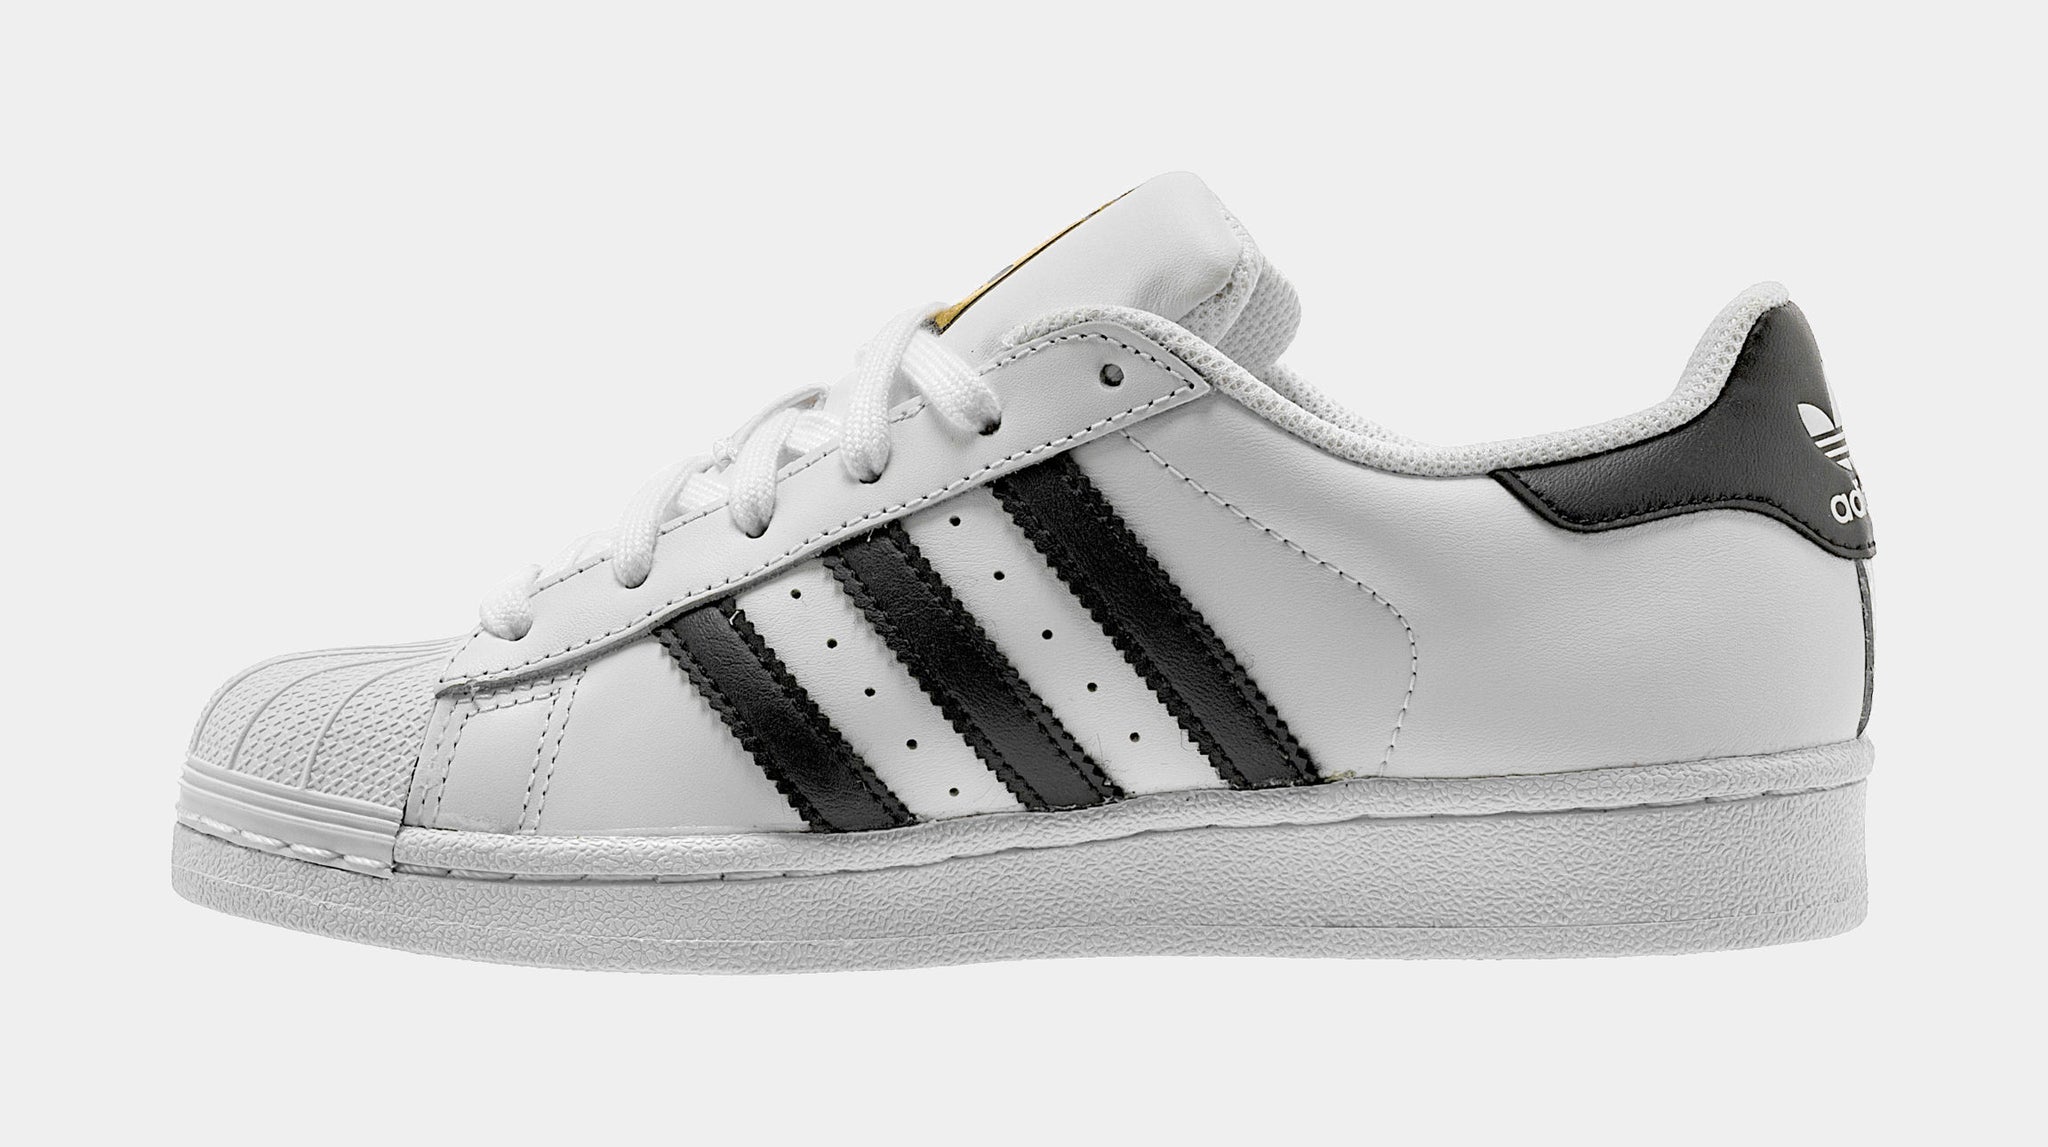 ADIDAS Youth Size 4.5 SuperStar Shell Toe White Black Stripes Sneaker  C77154